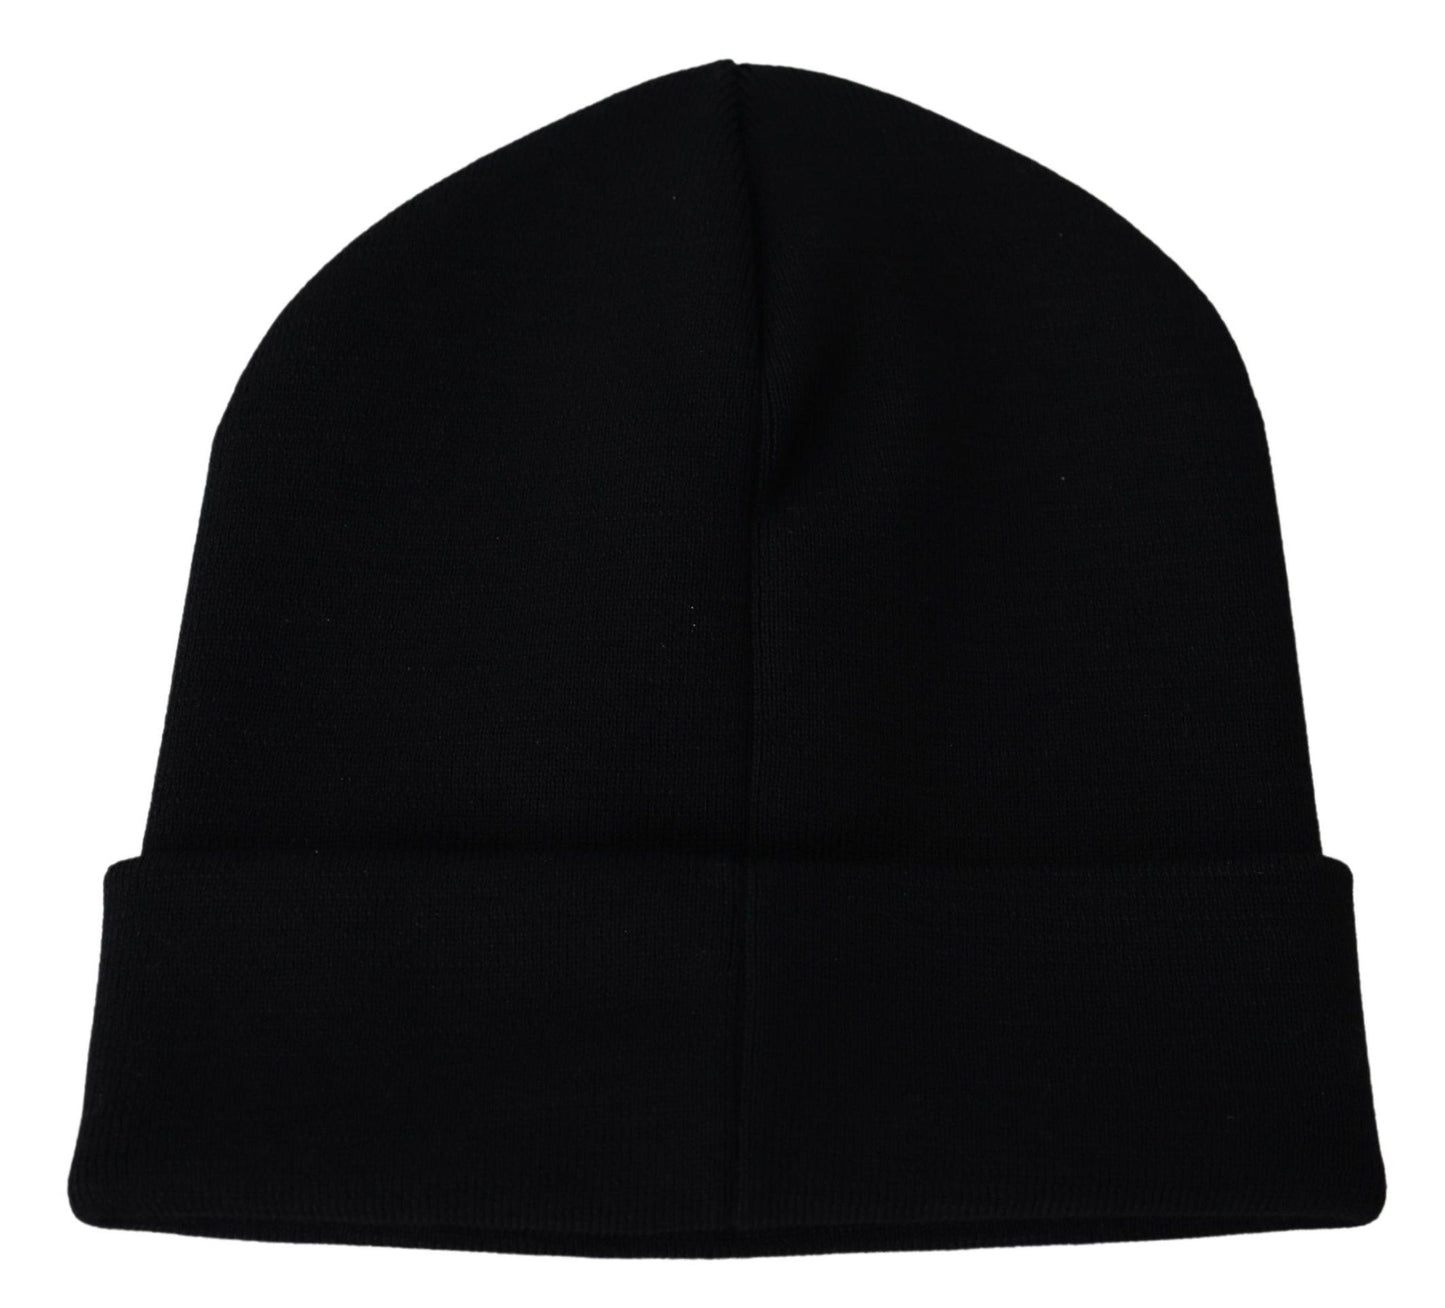 Givenchy Black Wool Unisex Winter Warm Beanie Hat - Designed by Givenchy Available to Buy at a Discounted Price on Moon Behind The Hill Online Designer Discount Store